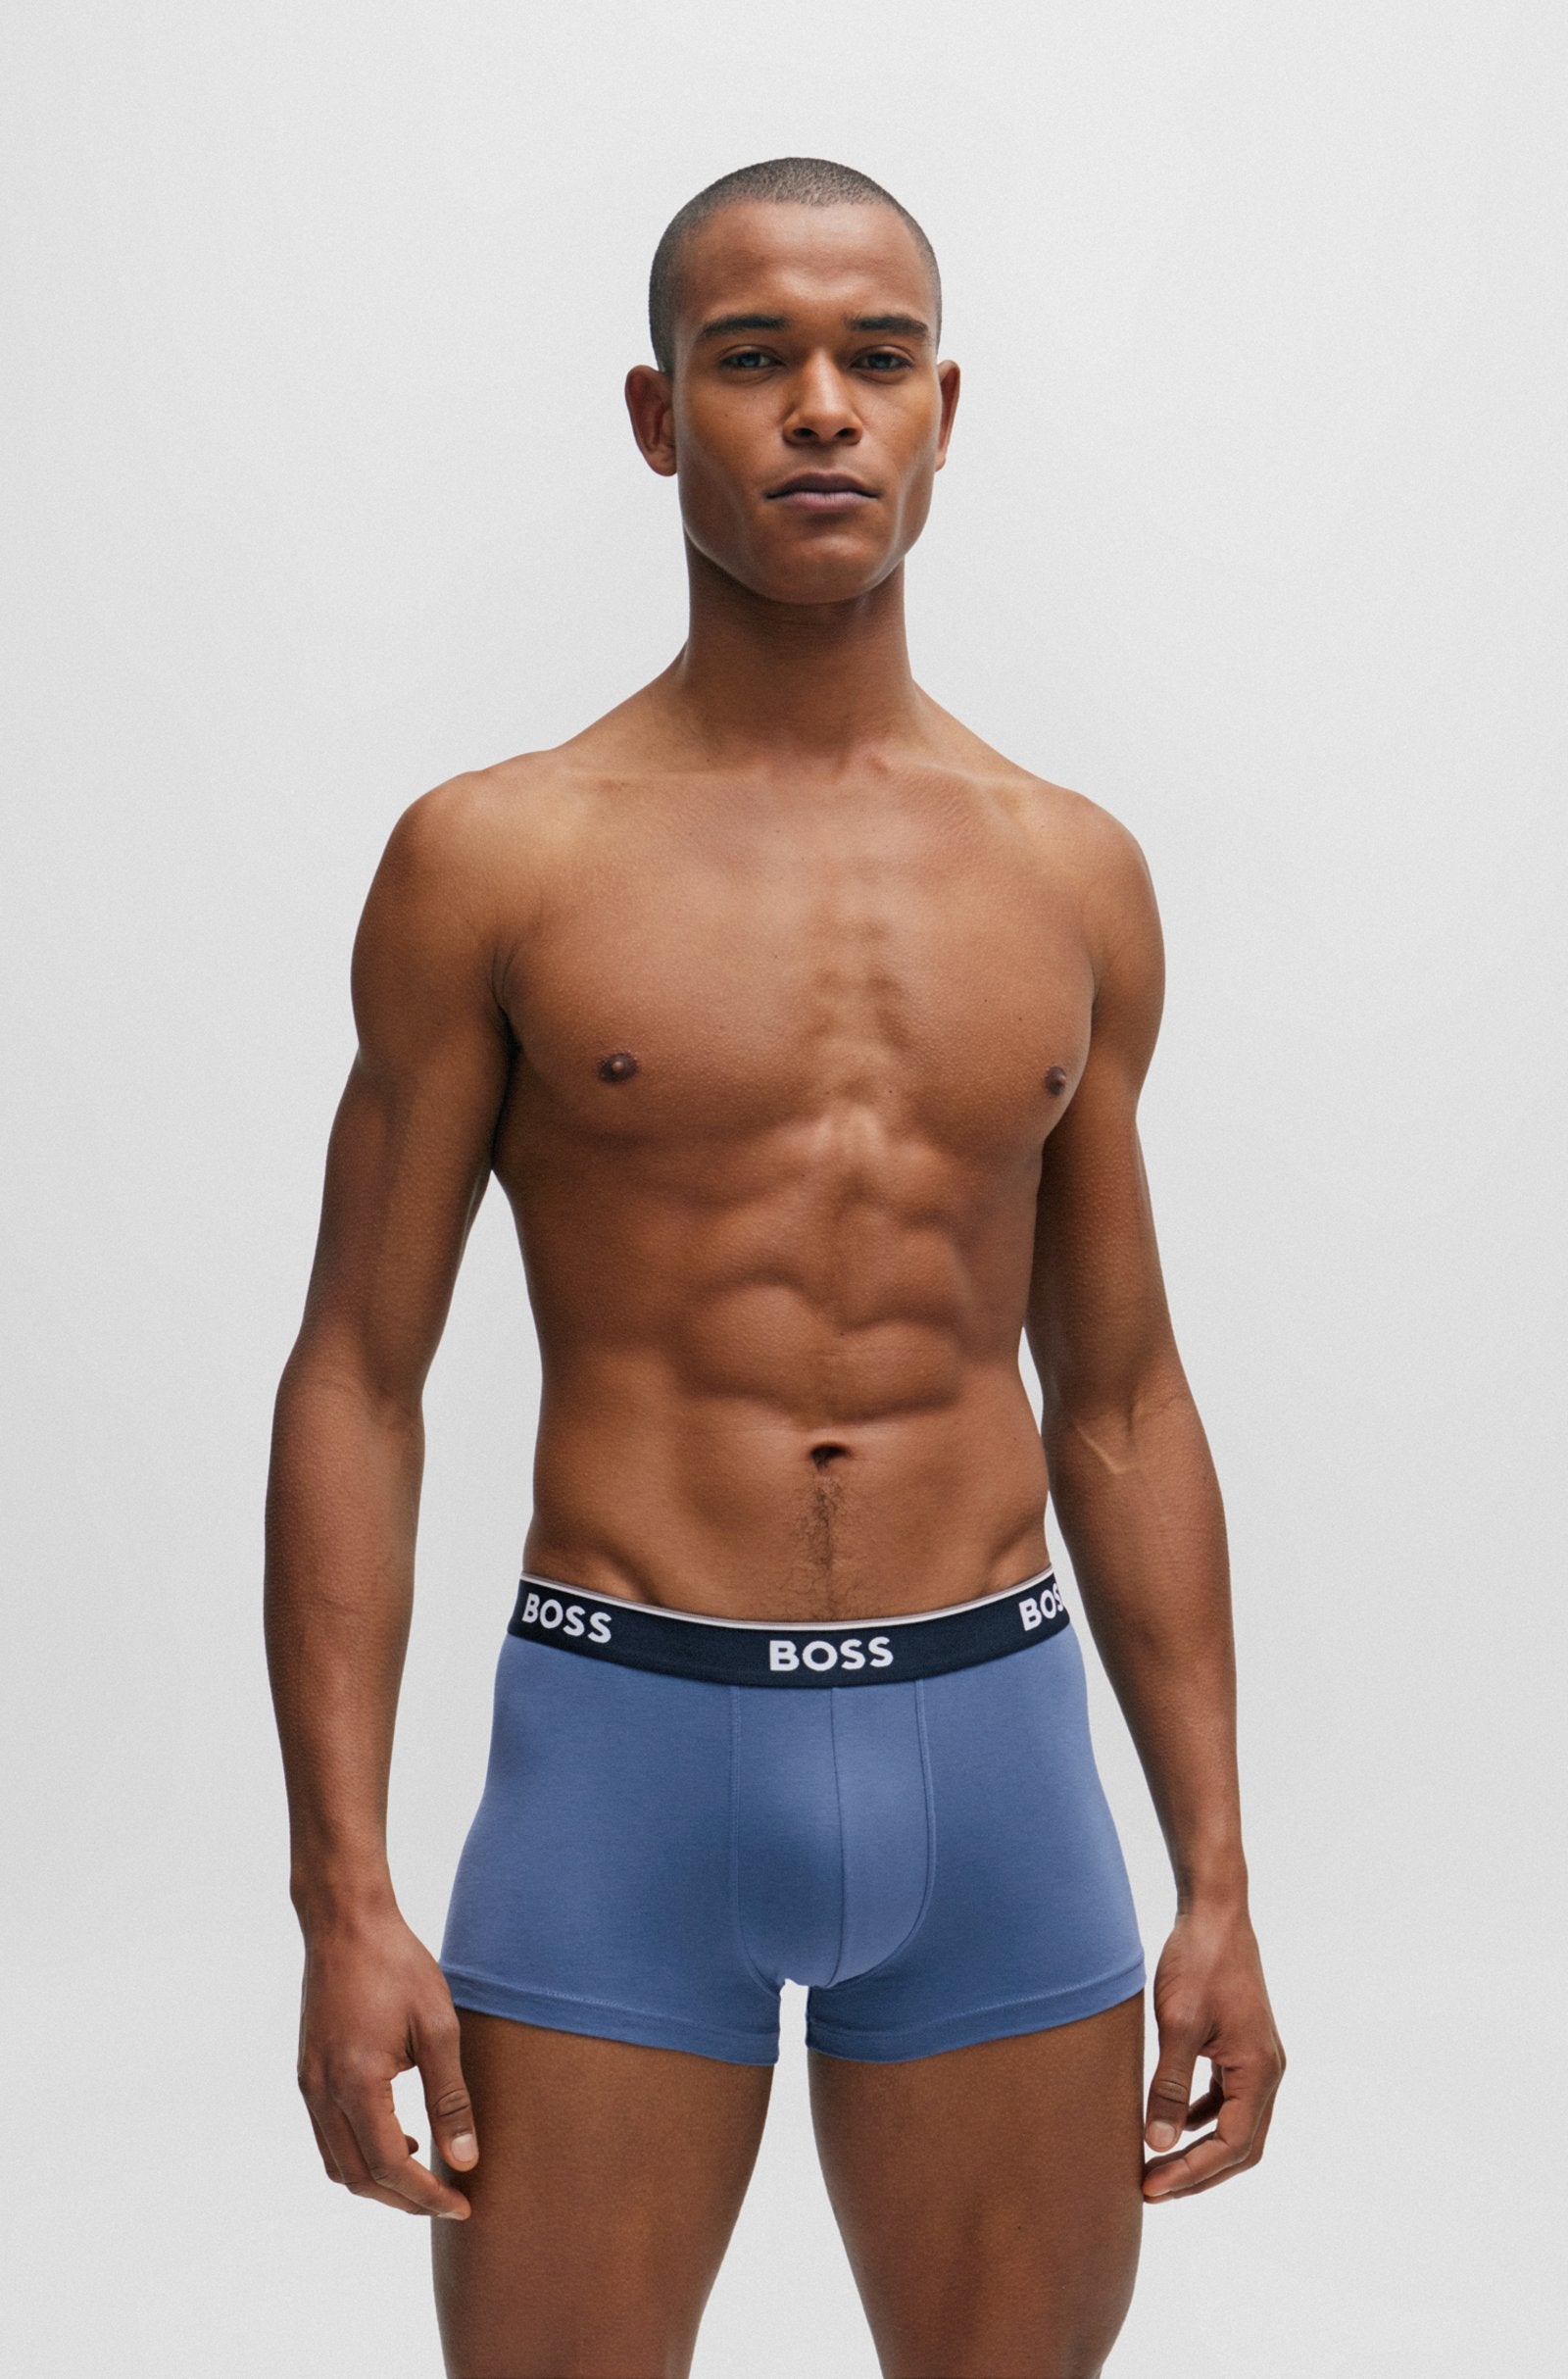 BOSS - Boxed 3-Pack Of Cotton Trunks With Logo Waistbands 50508985 987